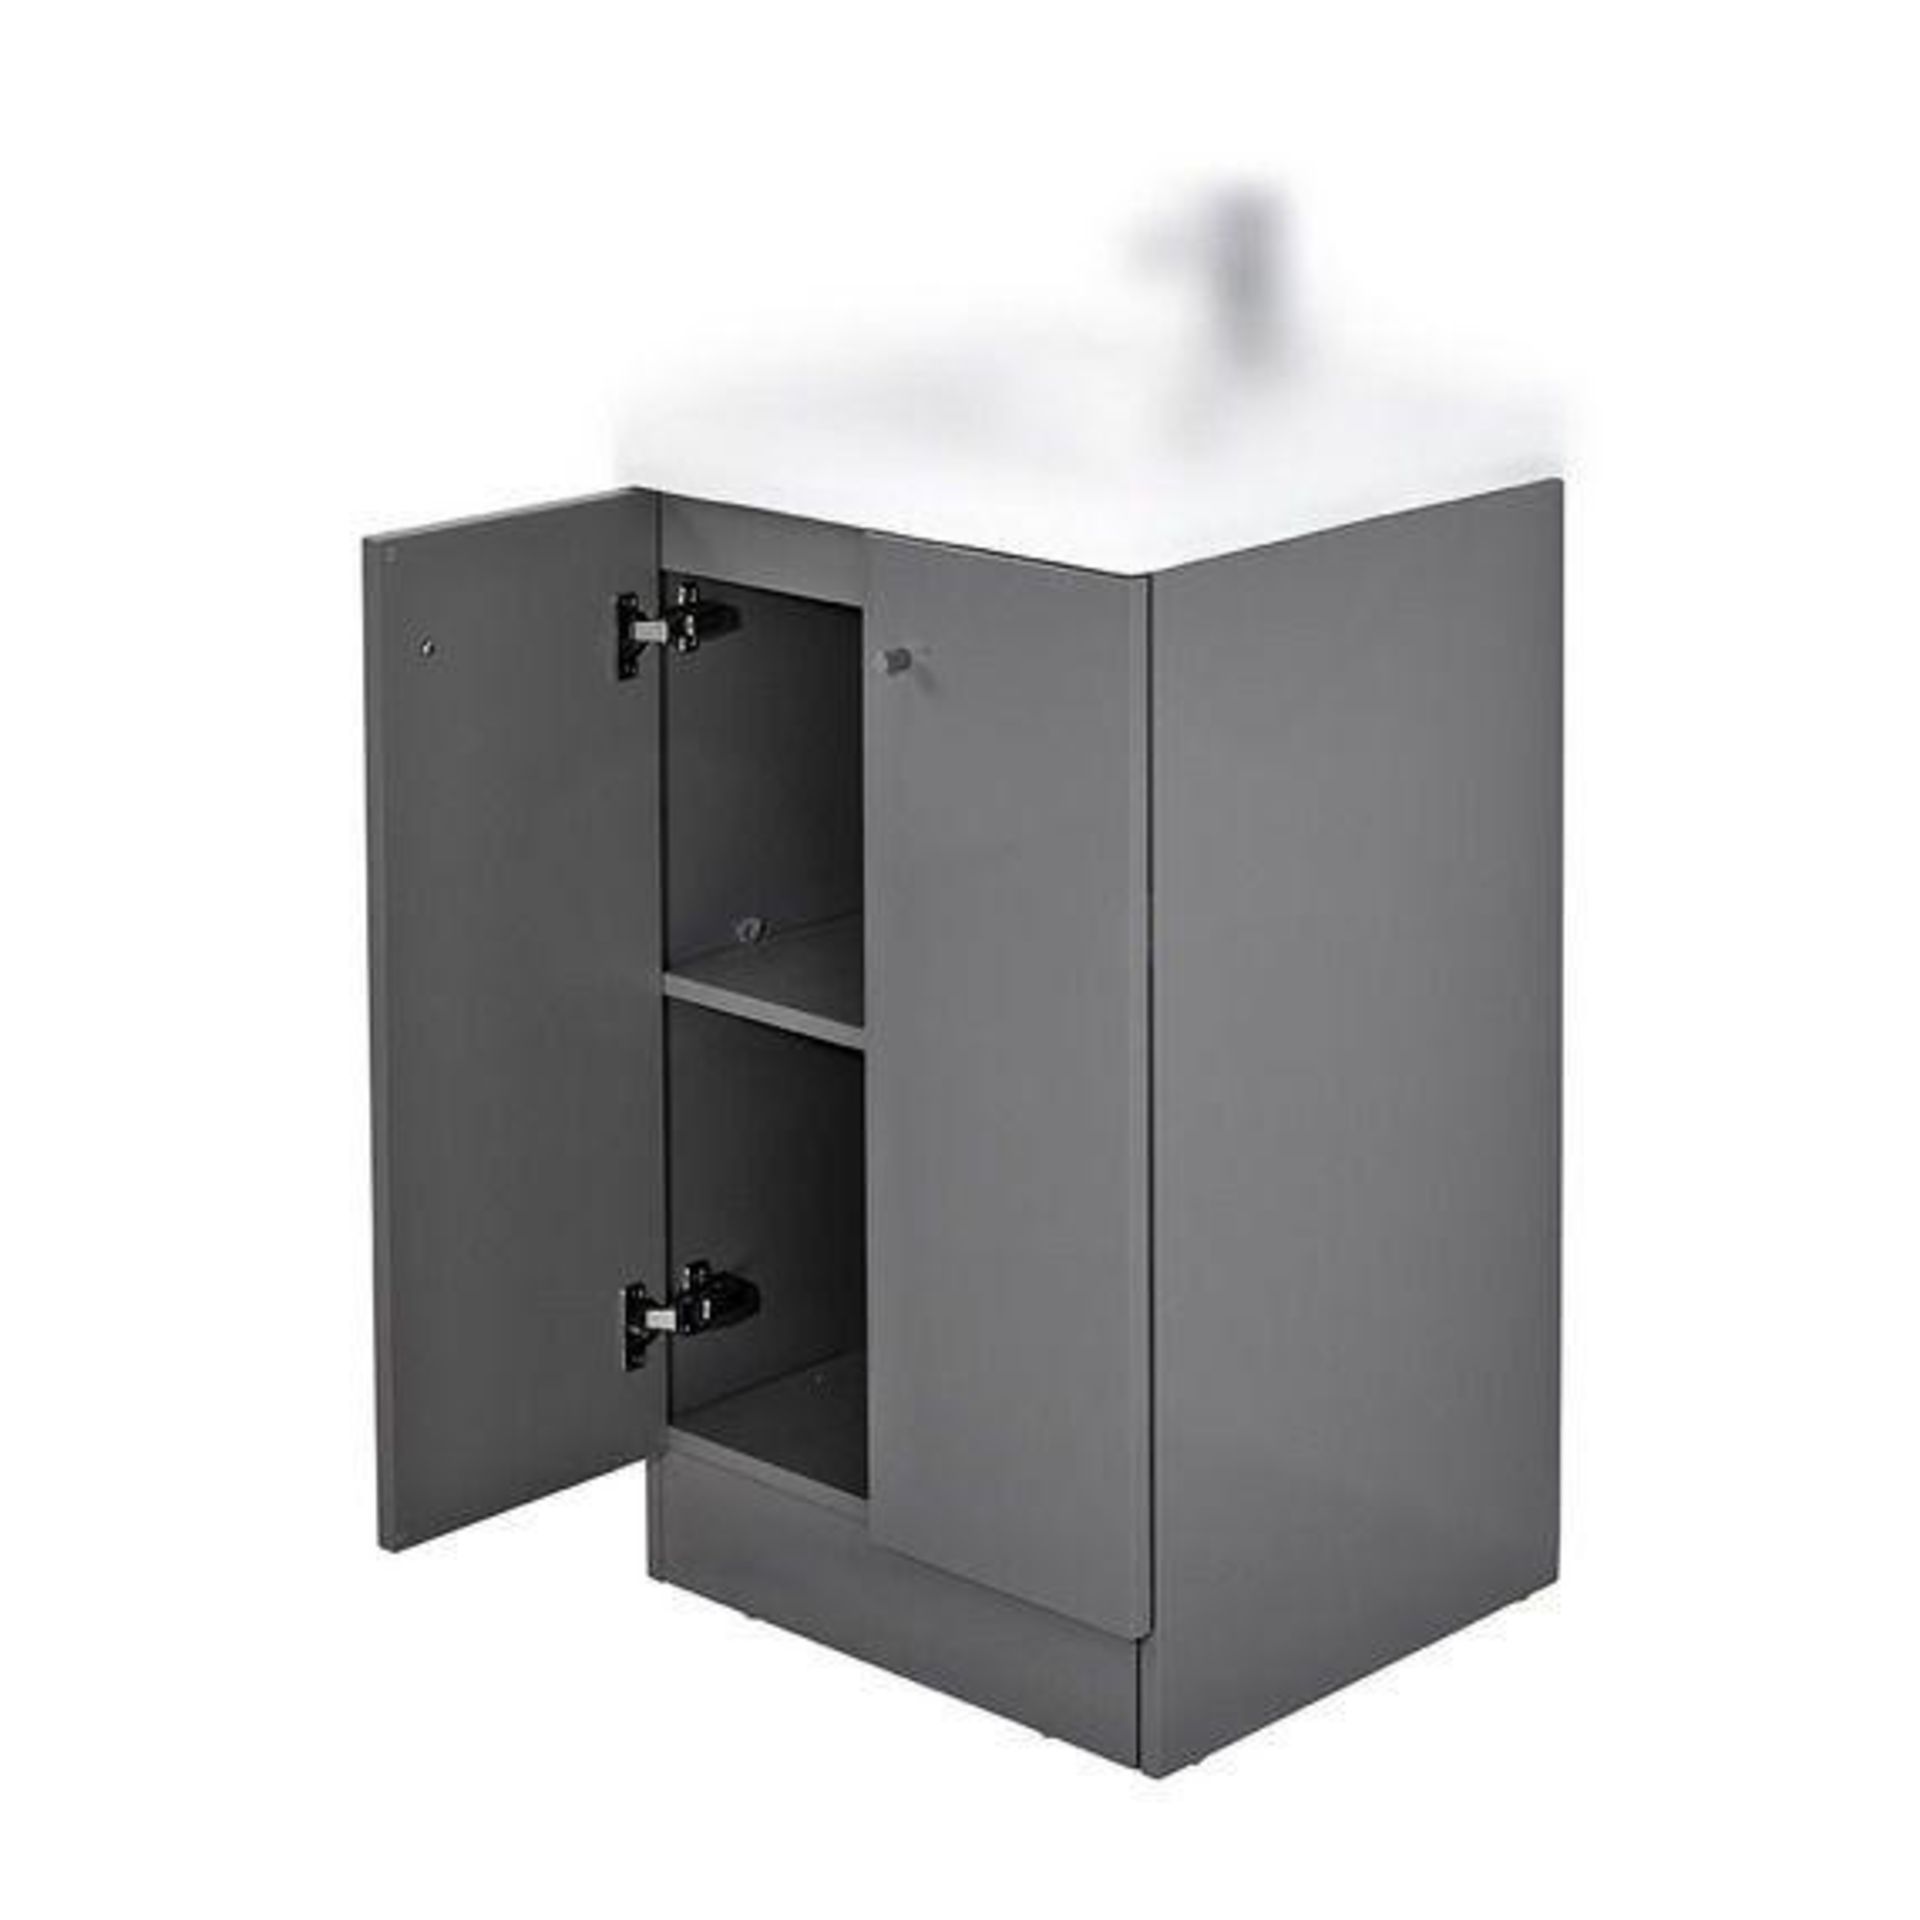 10 x Alpine Duo 500 Floor Standing Vanity Unit - Ultra-Modern Square Design With Soft Close Doors an - Image 3 of 5